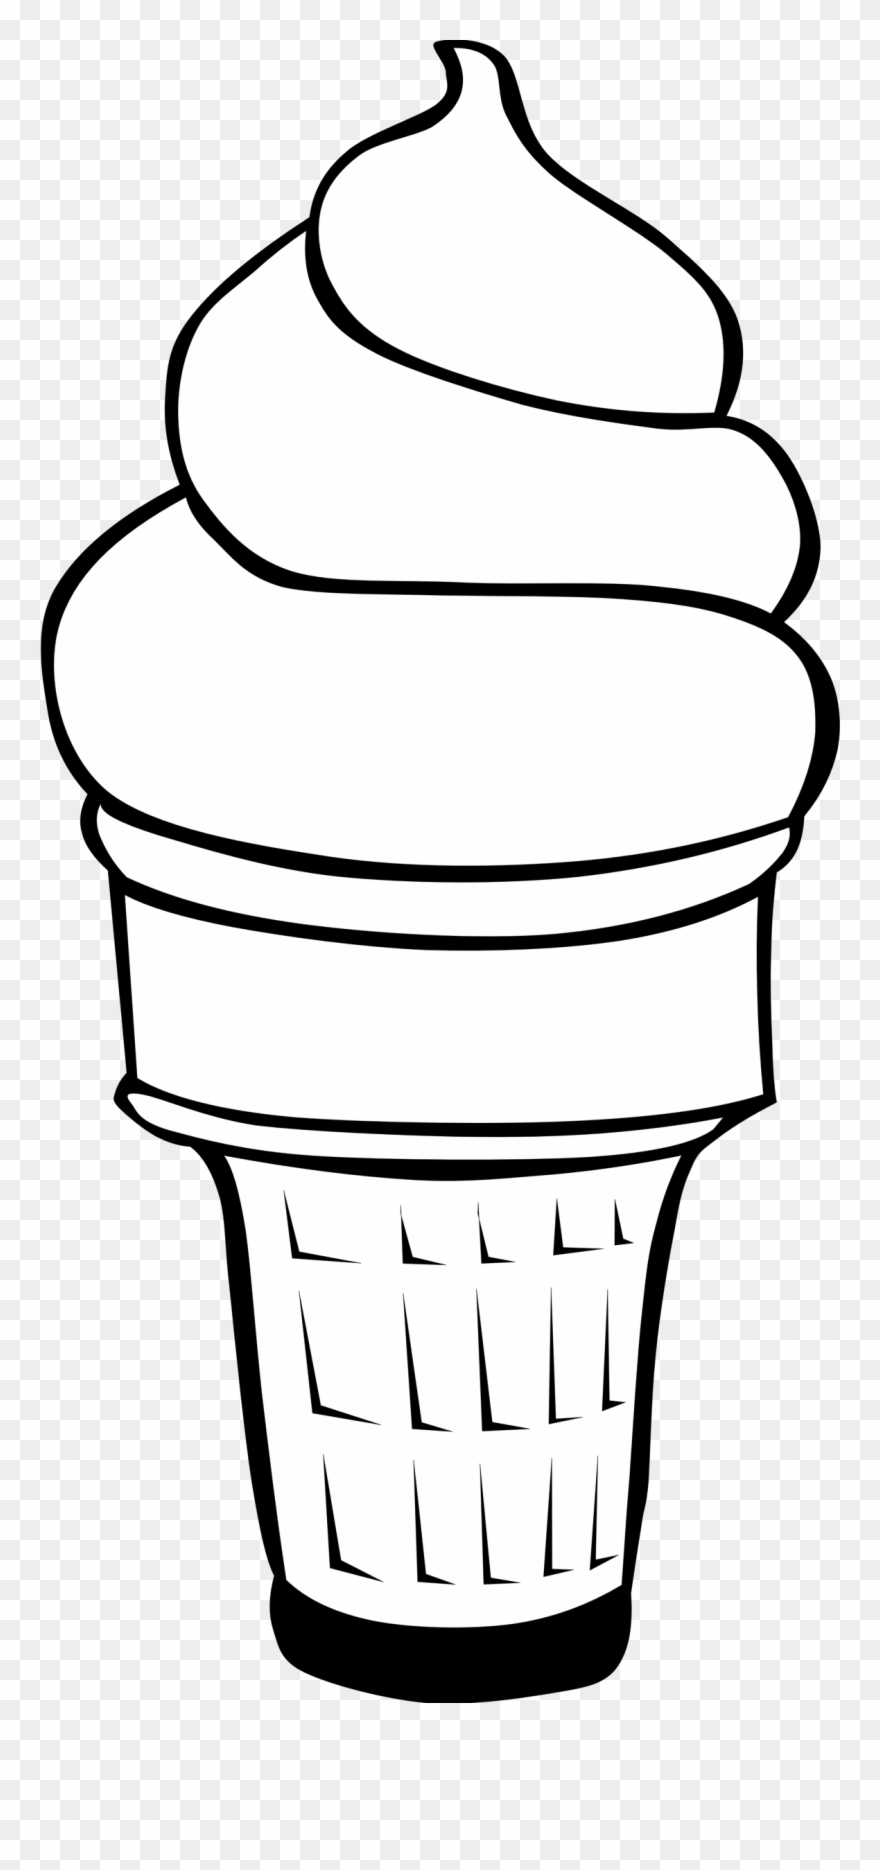 Cute Ice Cream Cone Drawing | Free download on ClipArtMag